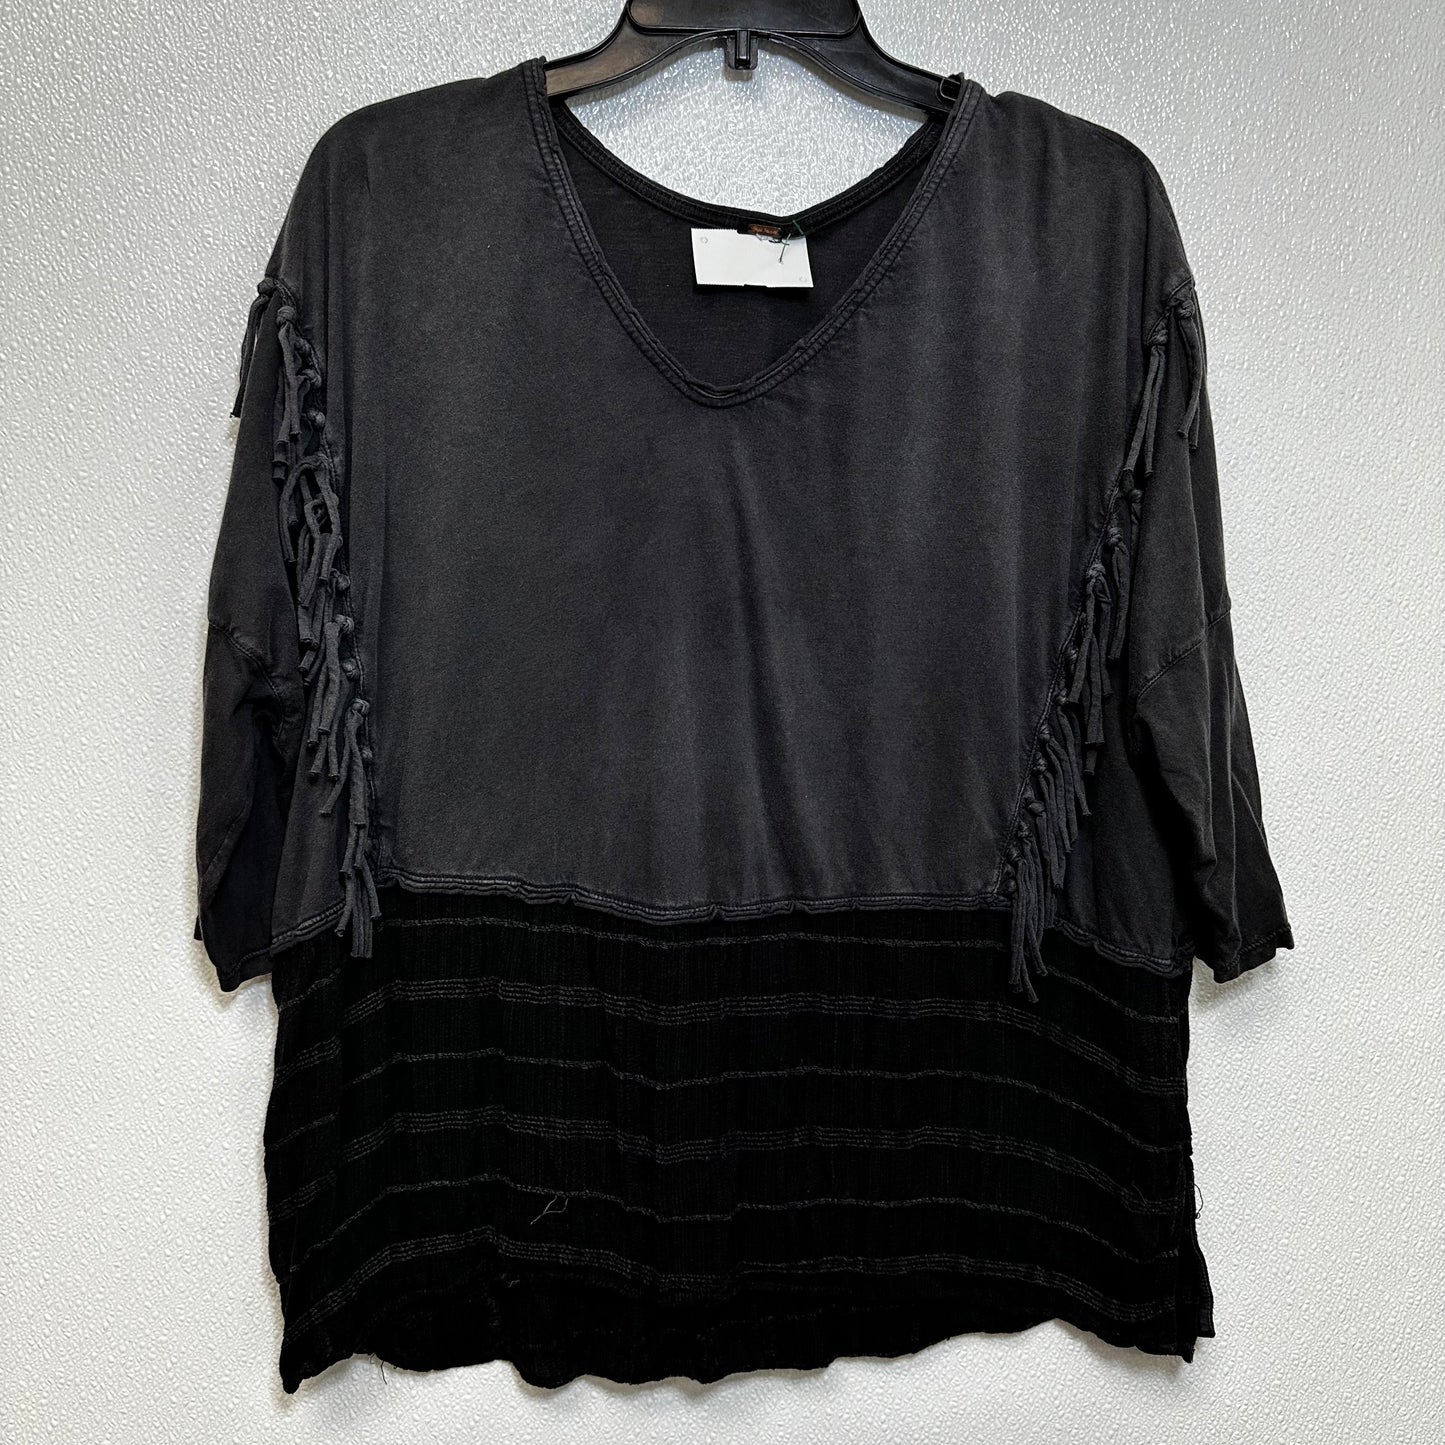 Grey Top 3/4 Sleeve Free People, Size M